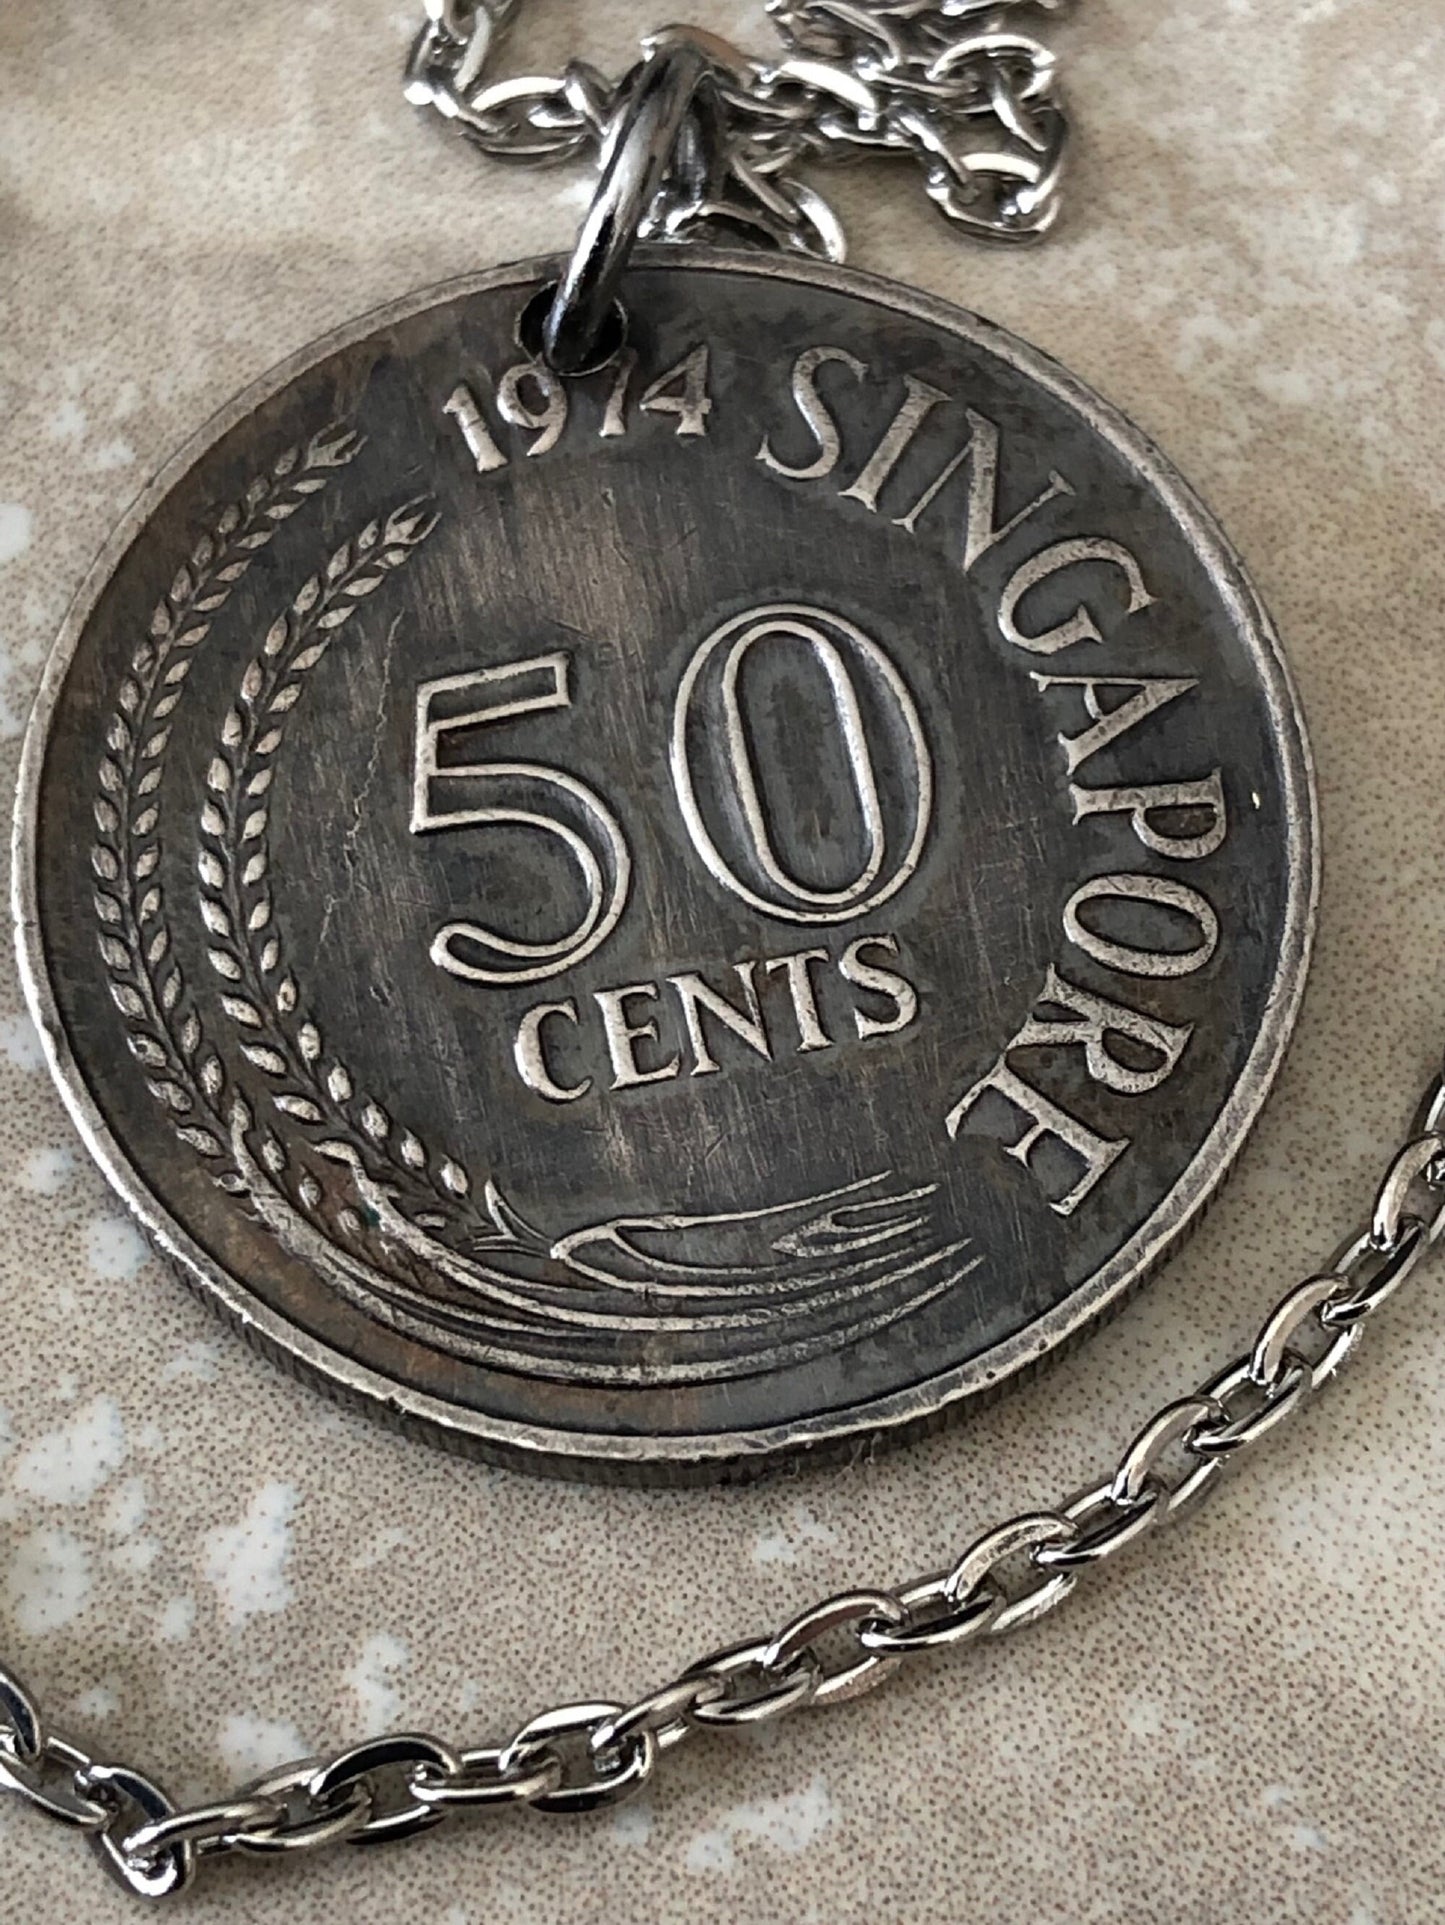 Singapore Hong Kong 50 Cent Coin Pendant Necklace Personal Old Vintage Handmade Jewelry Gift Friend Charm For Him Her World Coin Collector